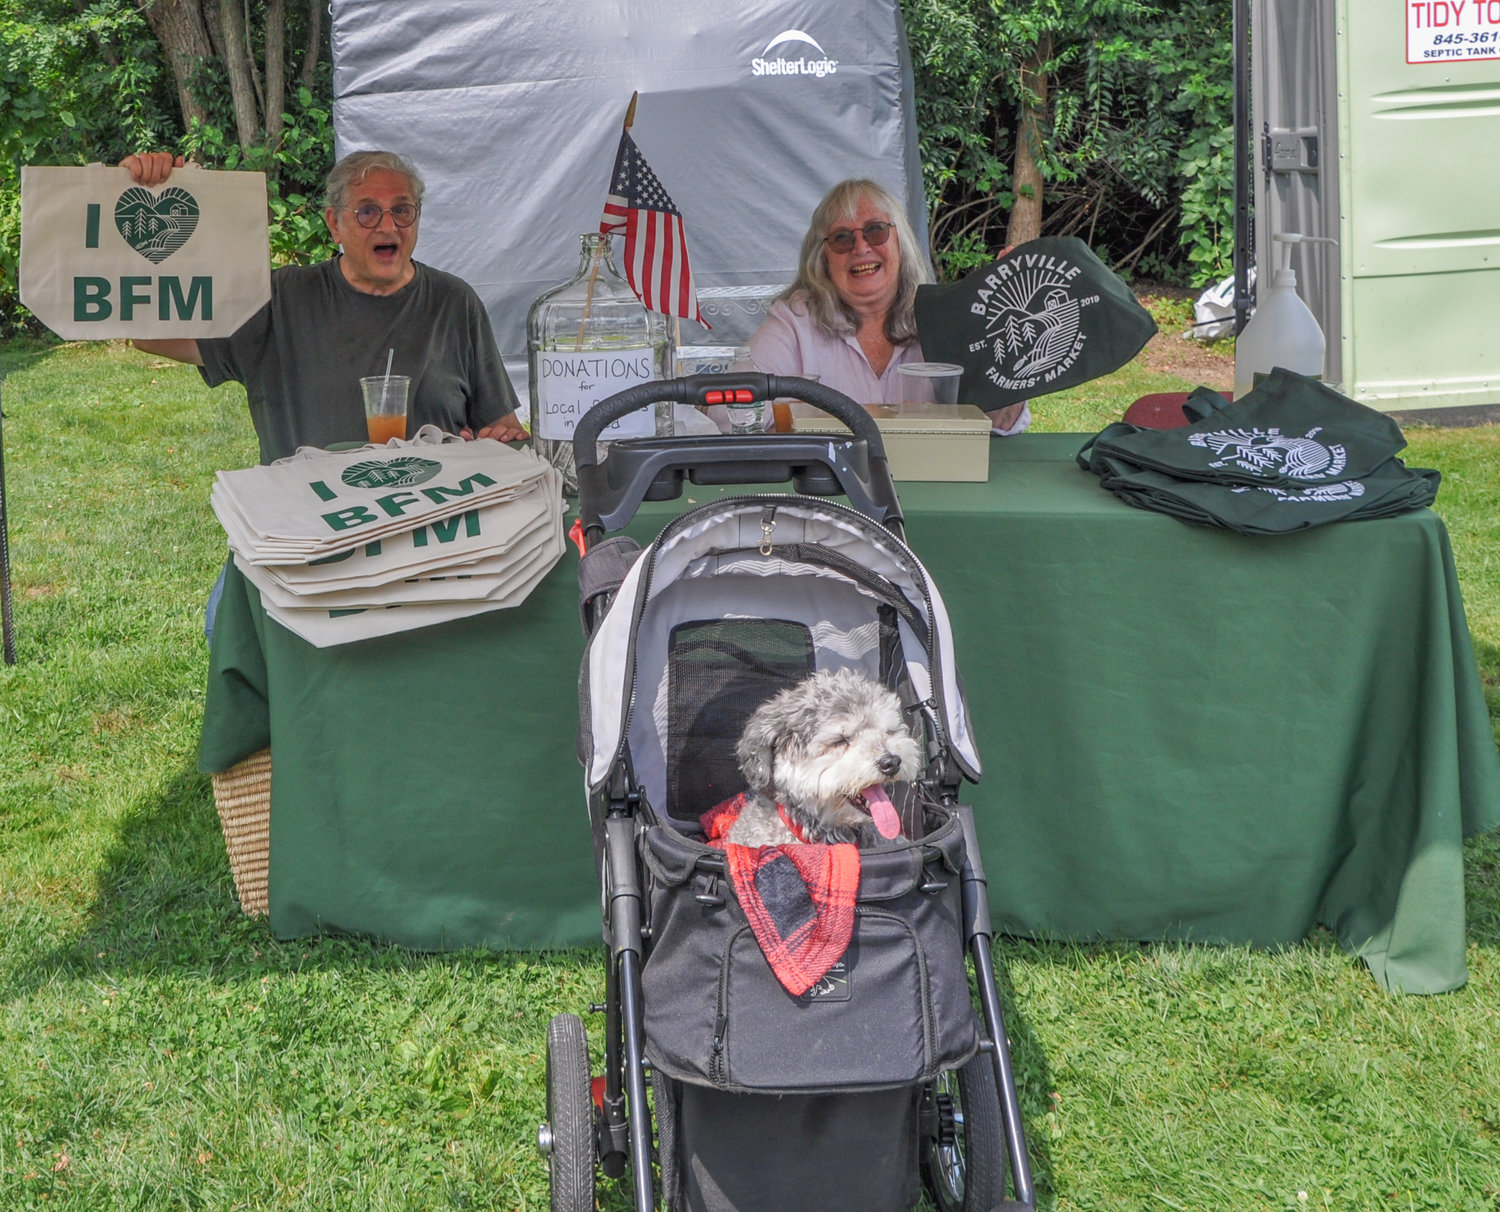 Barryville Farmers Market volunteers Richard Malenky and Nancy Handler were happy to "spread sunshine all over the place," which made my dog smile in her stroller. Don't judge!